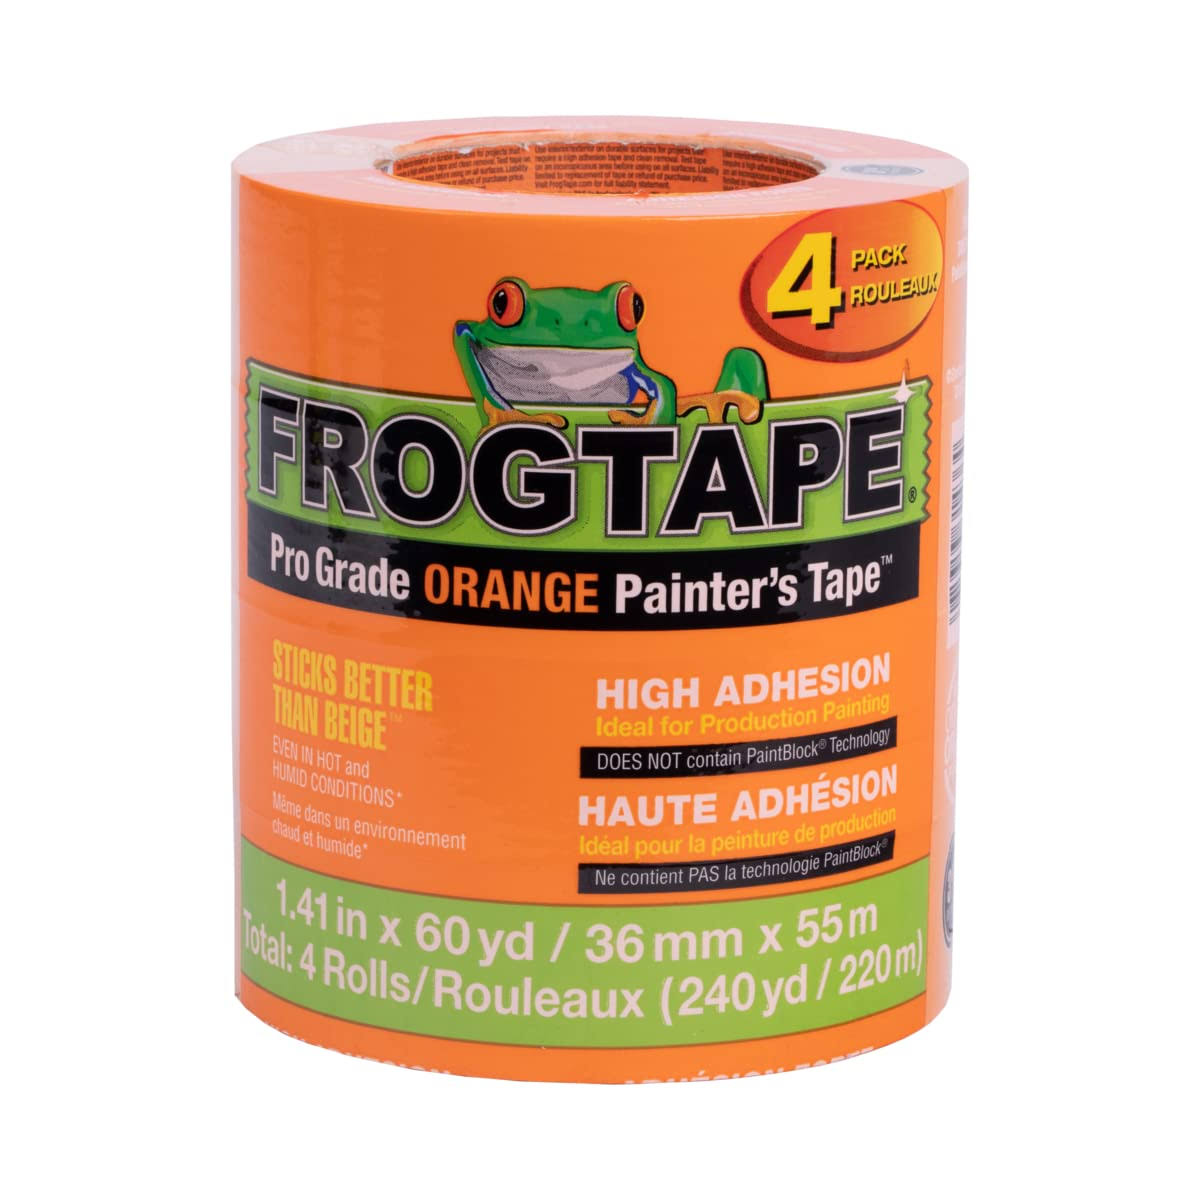 FrogTape Pro Grade 4-Pack 1.41-in x 60-yd Painters Tape 242808